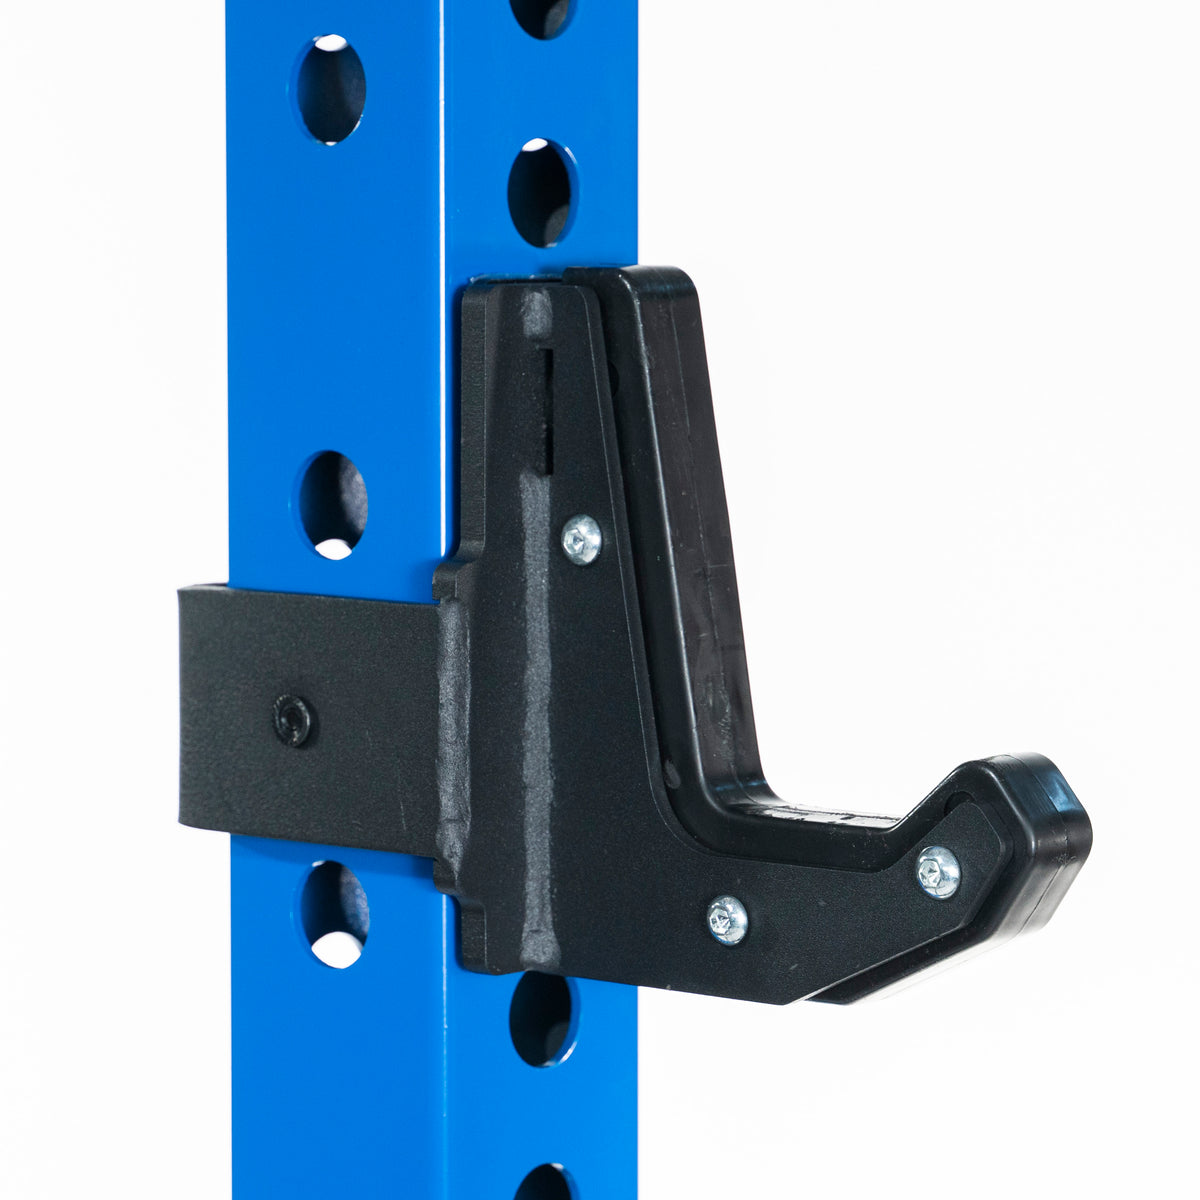 HALF RACK WITH SPOTTER ARMS